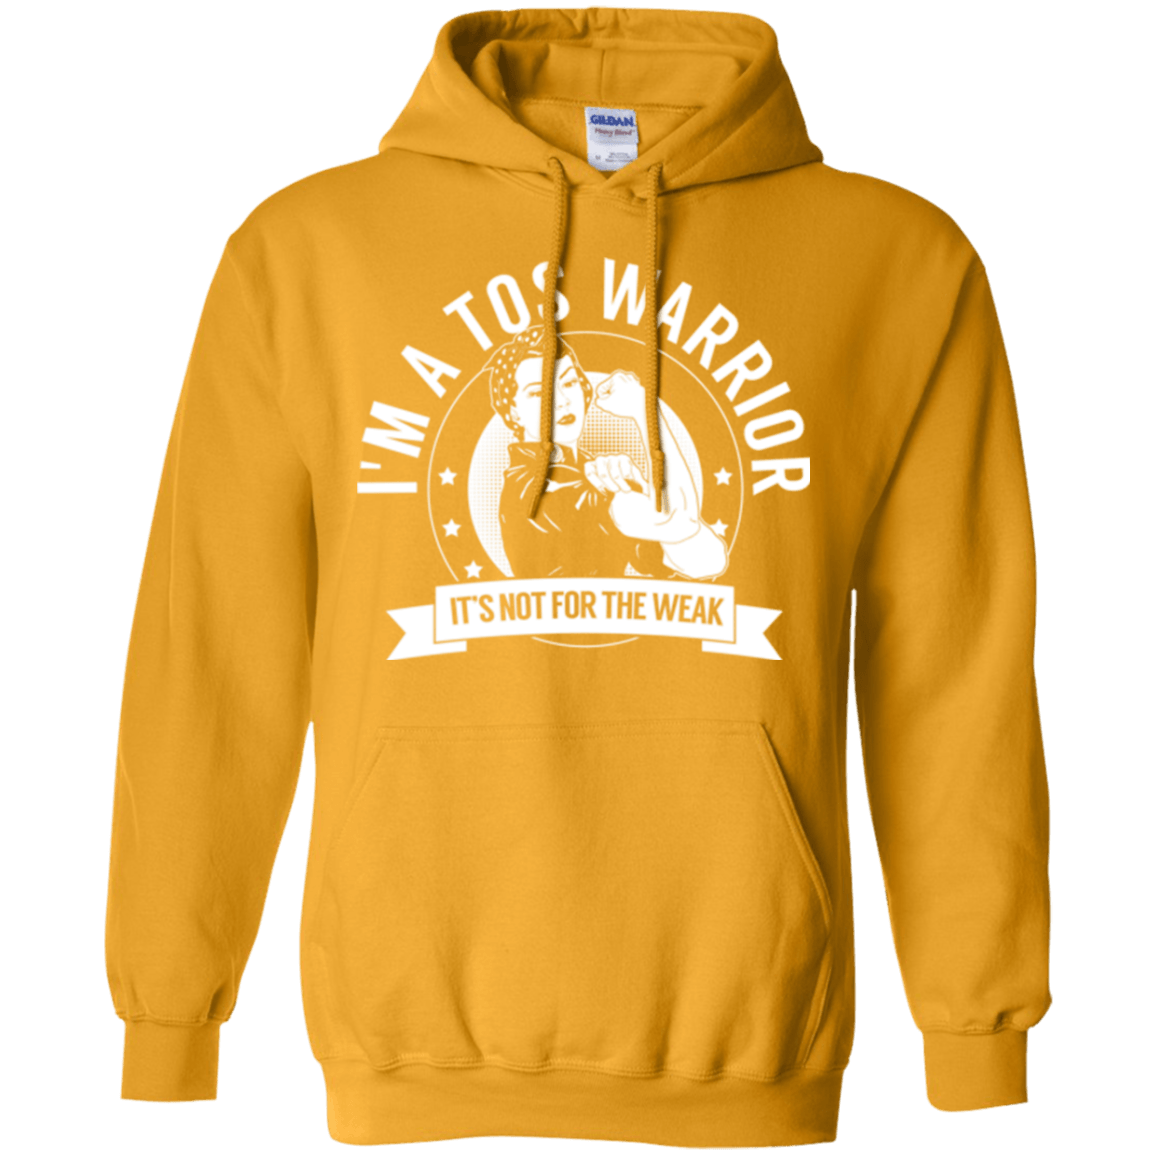 Thoracic Outlet Syndrome - TOS Warrior Not For The Weak Pullover Hoodie 8 oz. - The Unchargeables